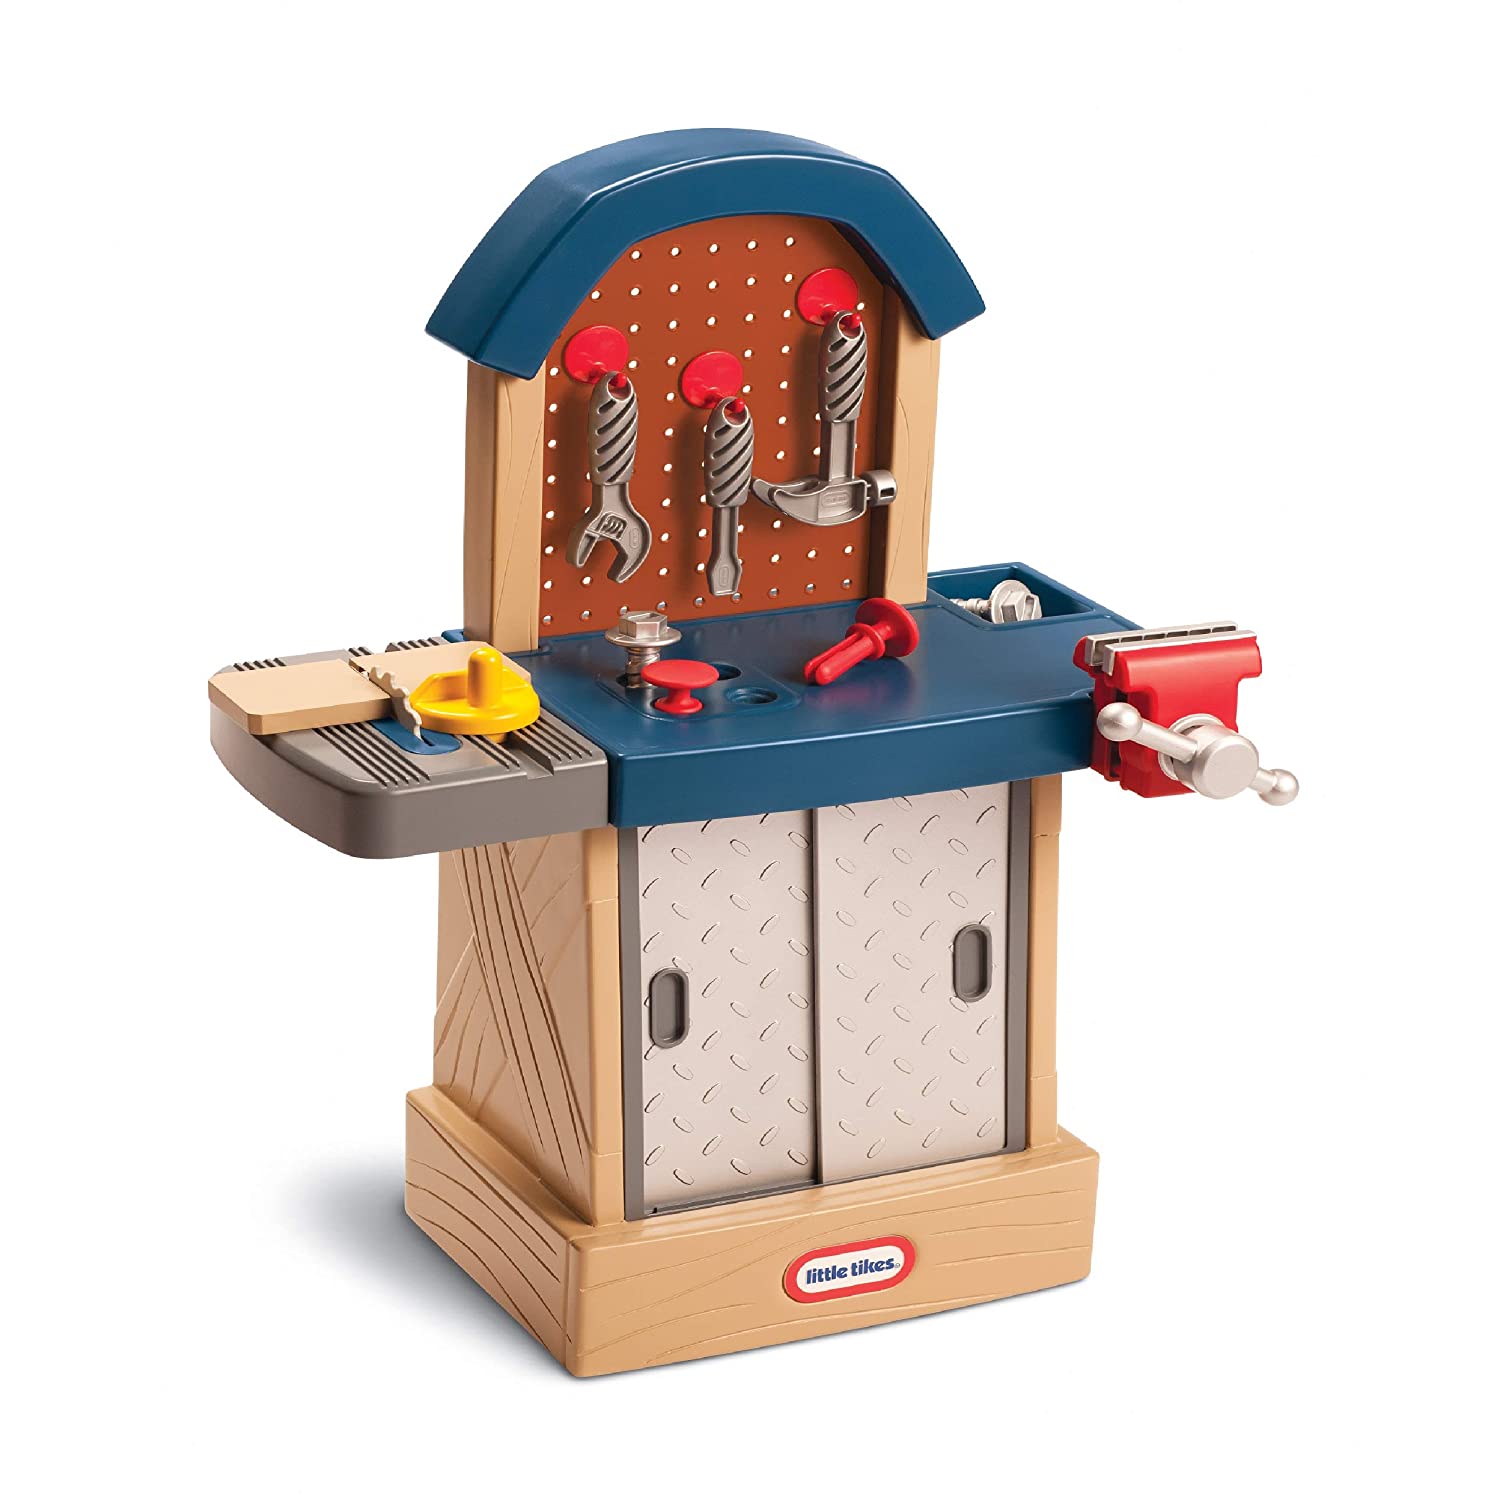 Top 9 Best Kids Toy Tool Bench Reviews in 2022 9